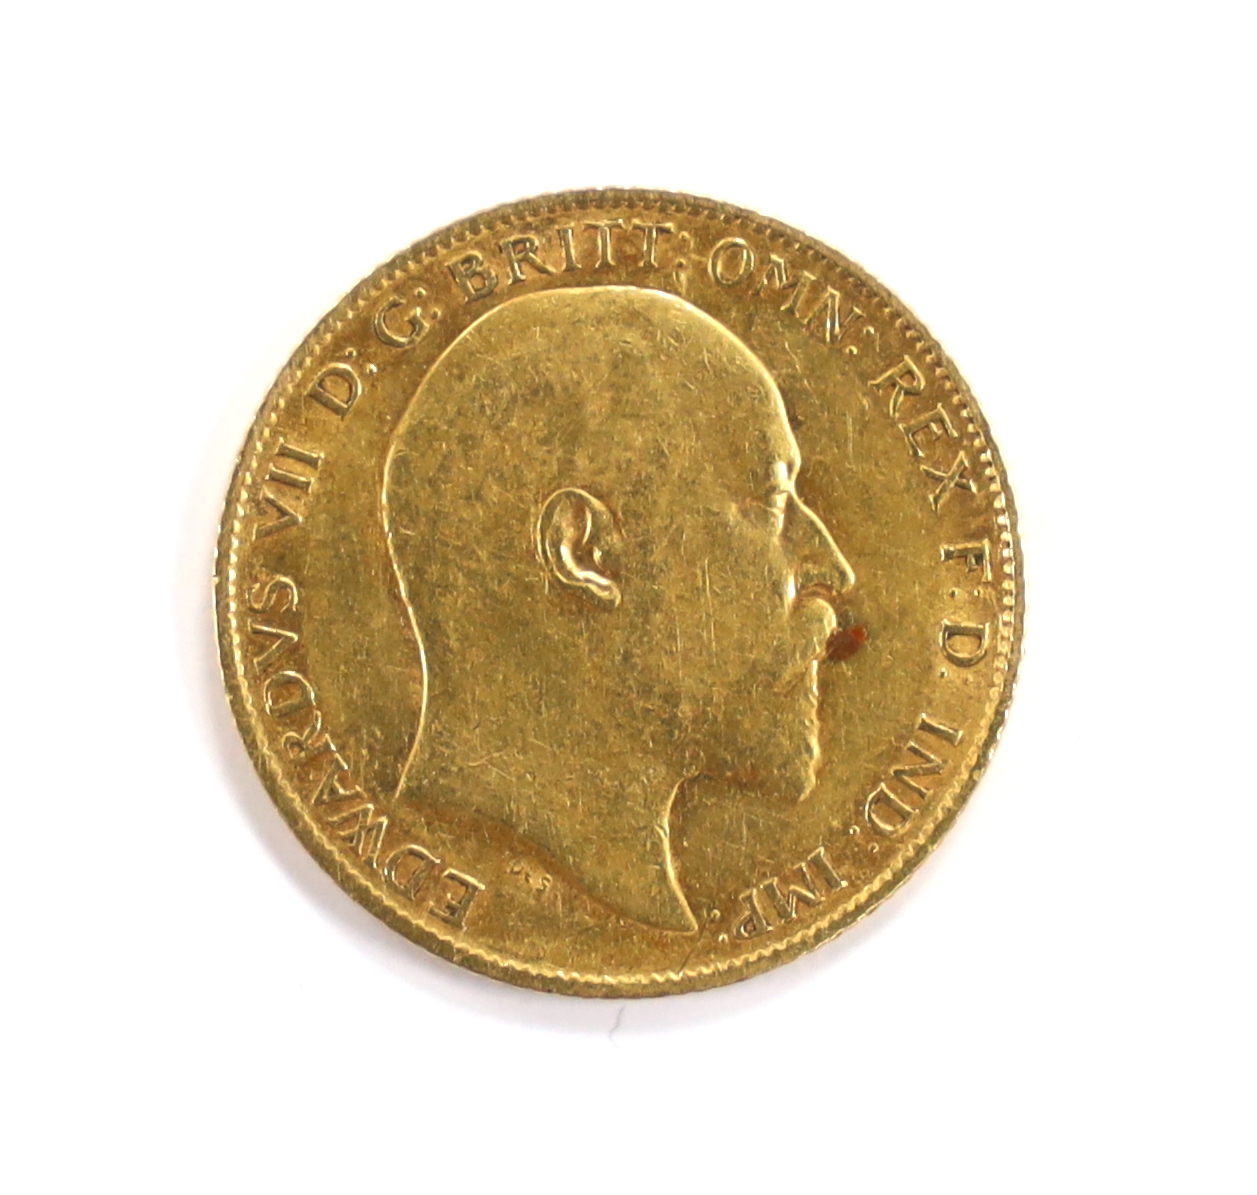 British gold coins, An Edward VII gold half sovereign, 1907, about VF - Image 2 of 2